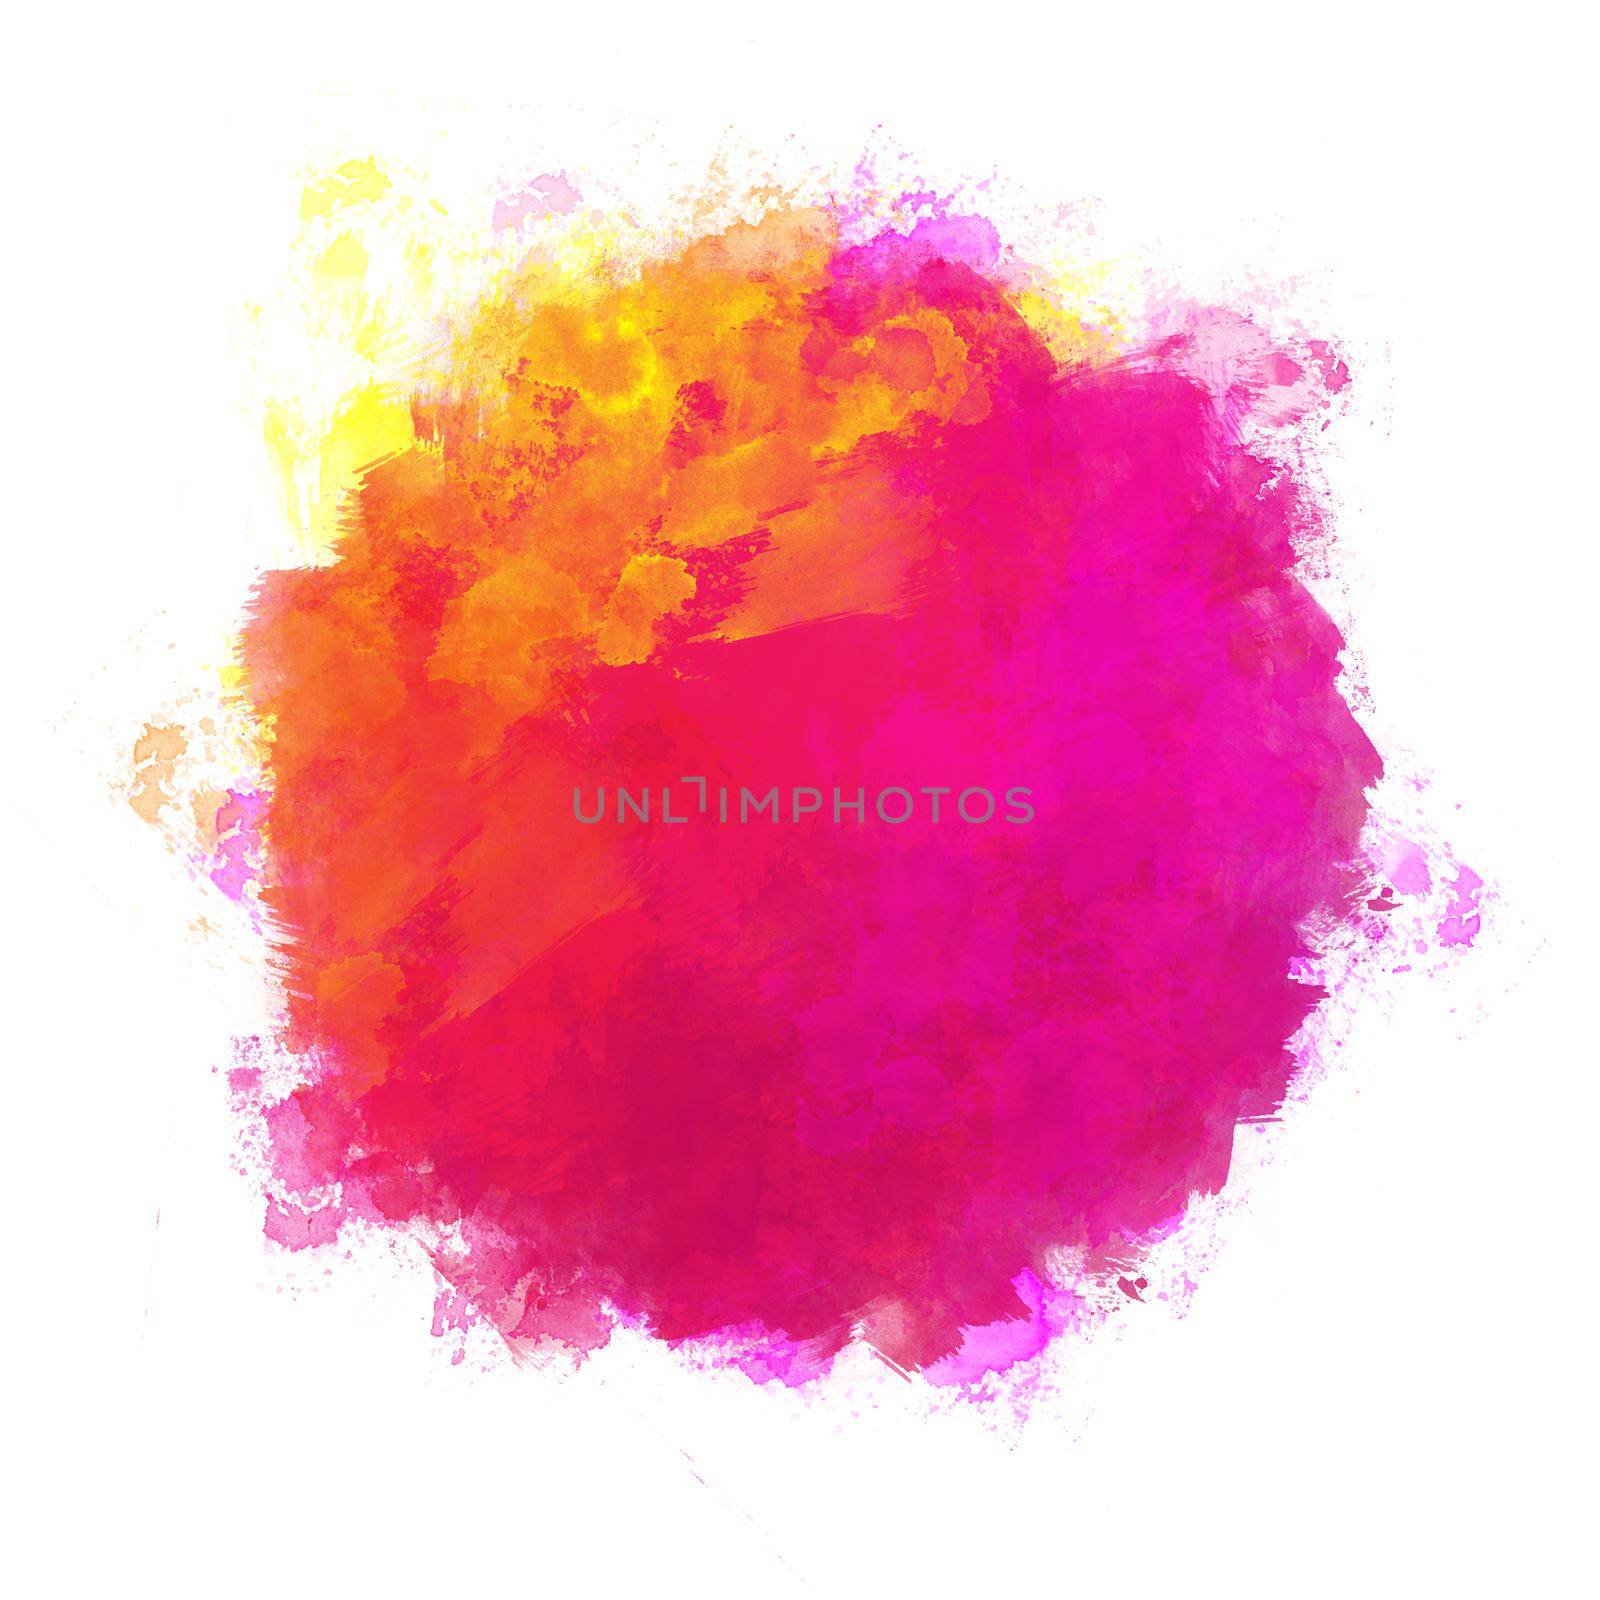 Abstract artistic beautiful colorful bright watercolor spot hand painted background. Text template. Grunge spring summer colors. Magenta, lilac and blue shades. Fashion trend hues .